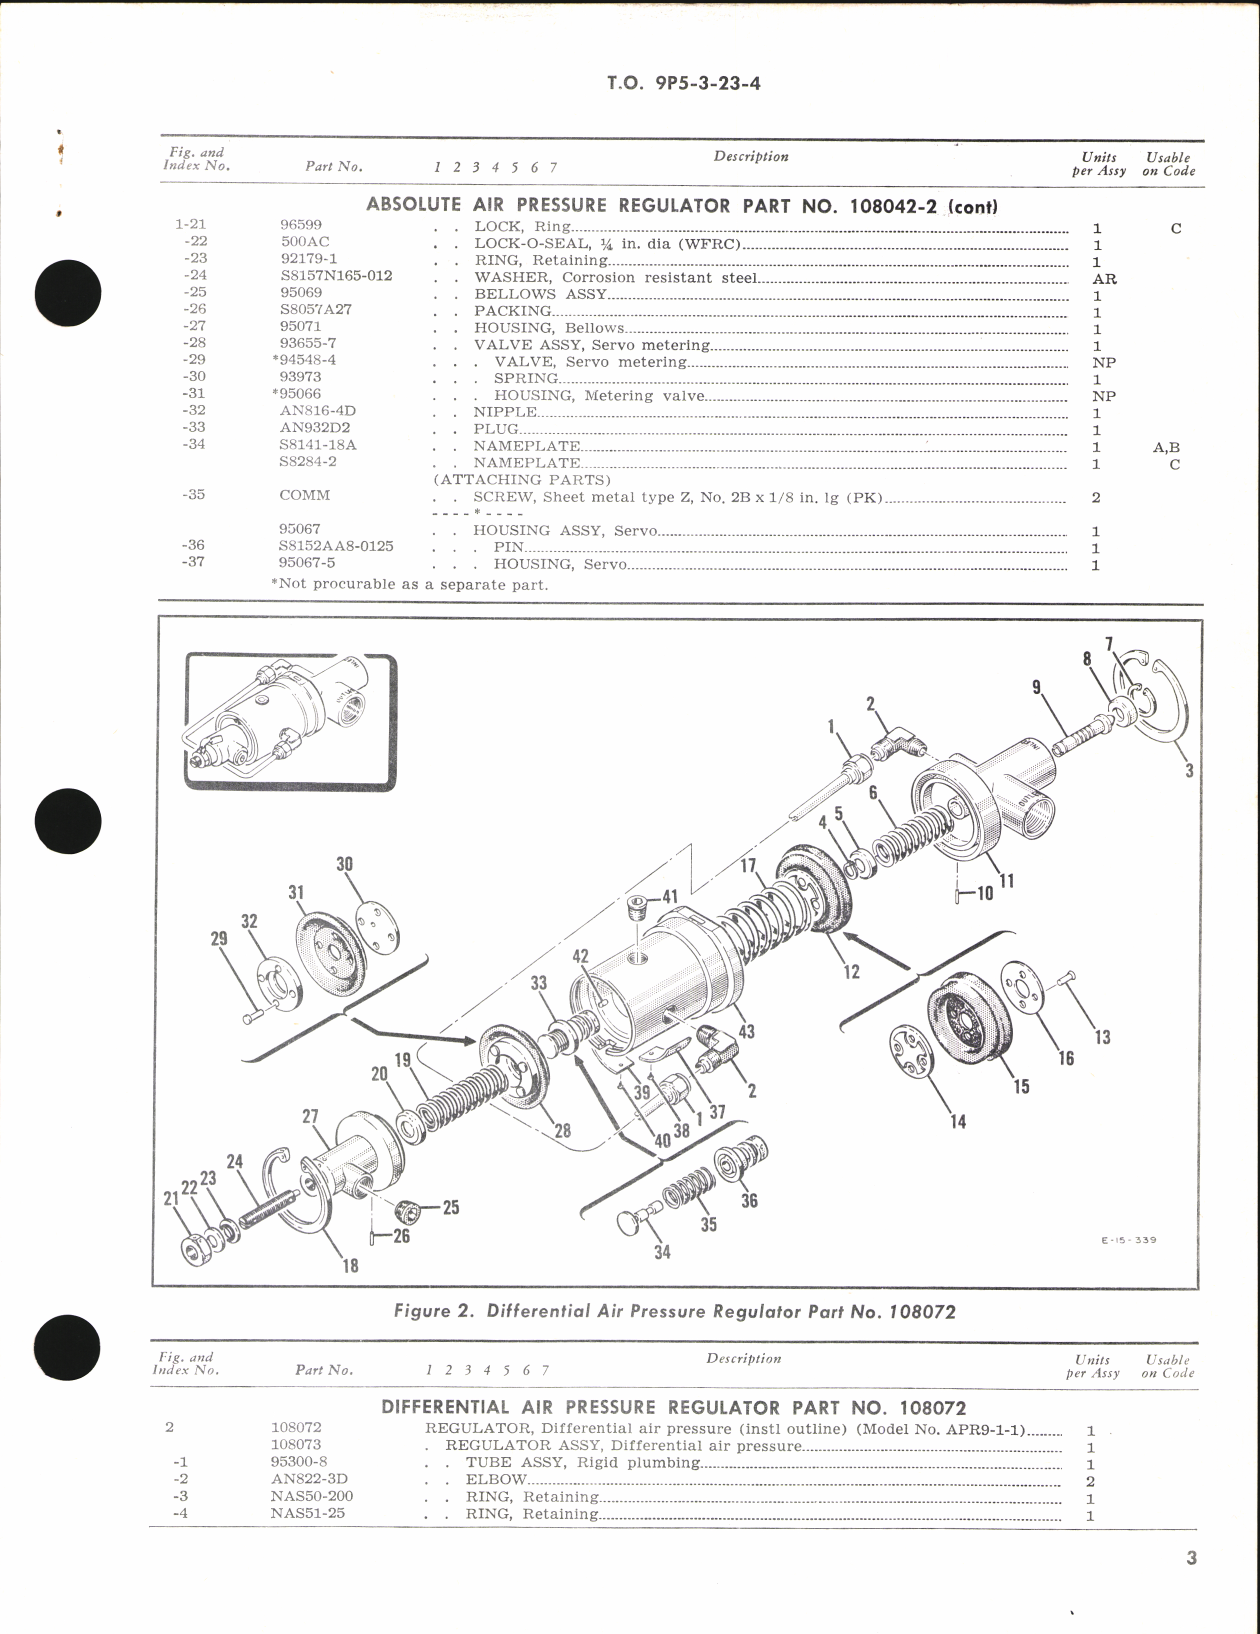 Sample page 3 from AirCorps Library document: Illustrated Parts Breakdown for Air Pressure Regulators 